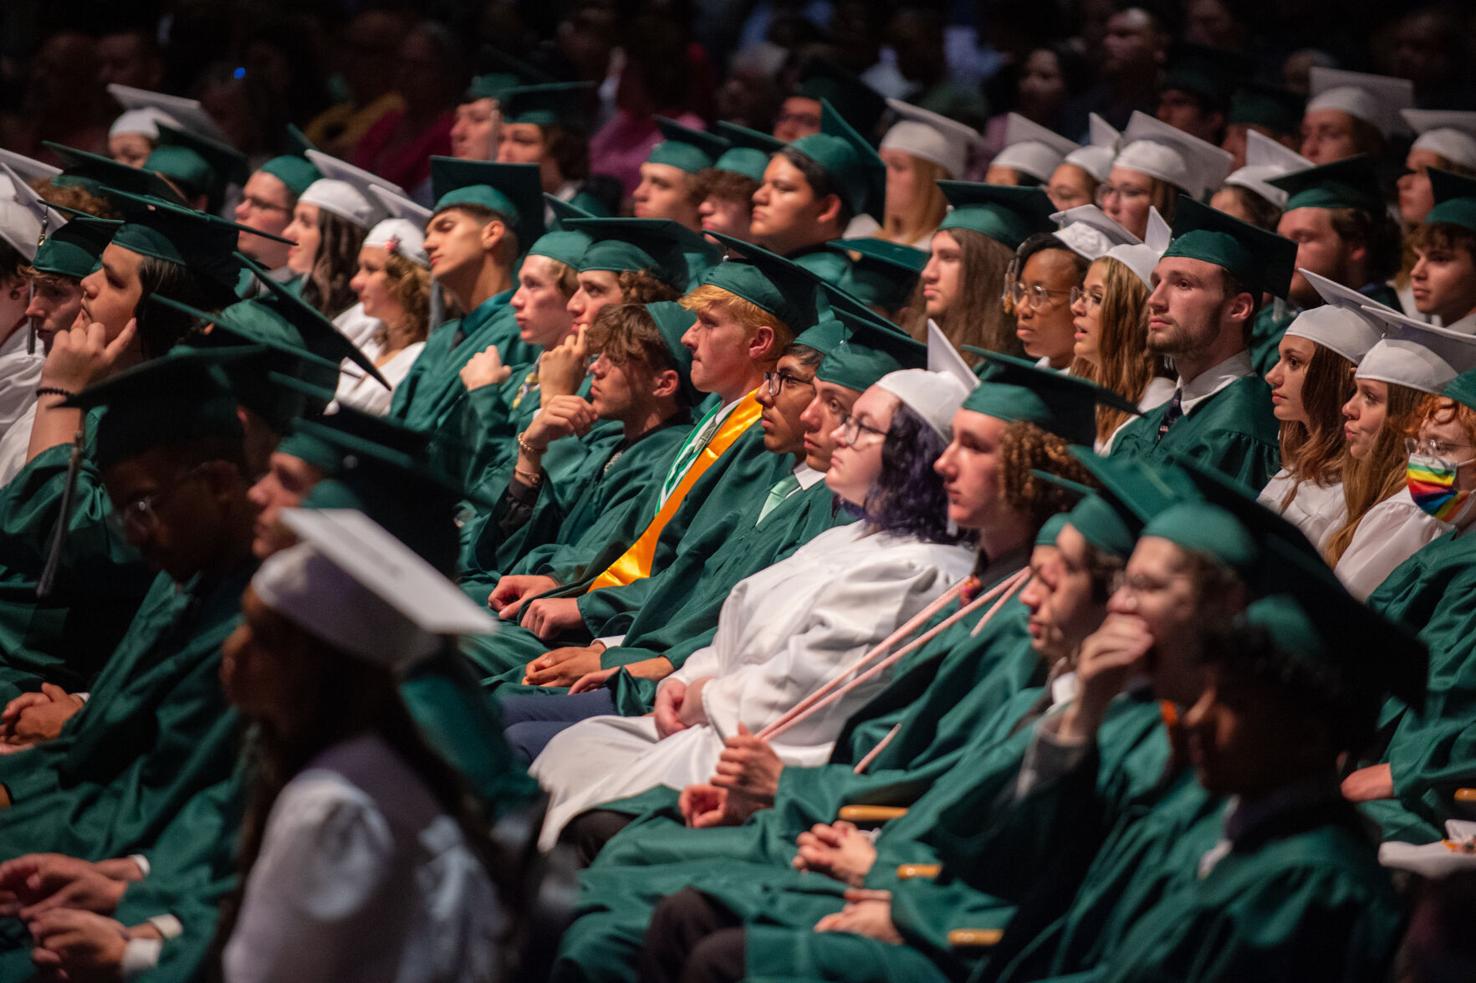 Donegal High School Class of 2022 graduates and award winners Local